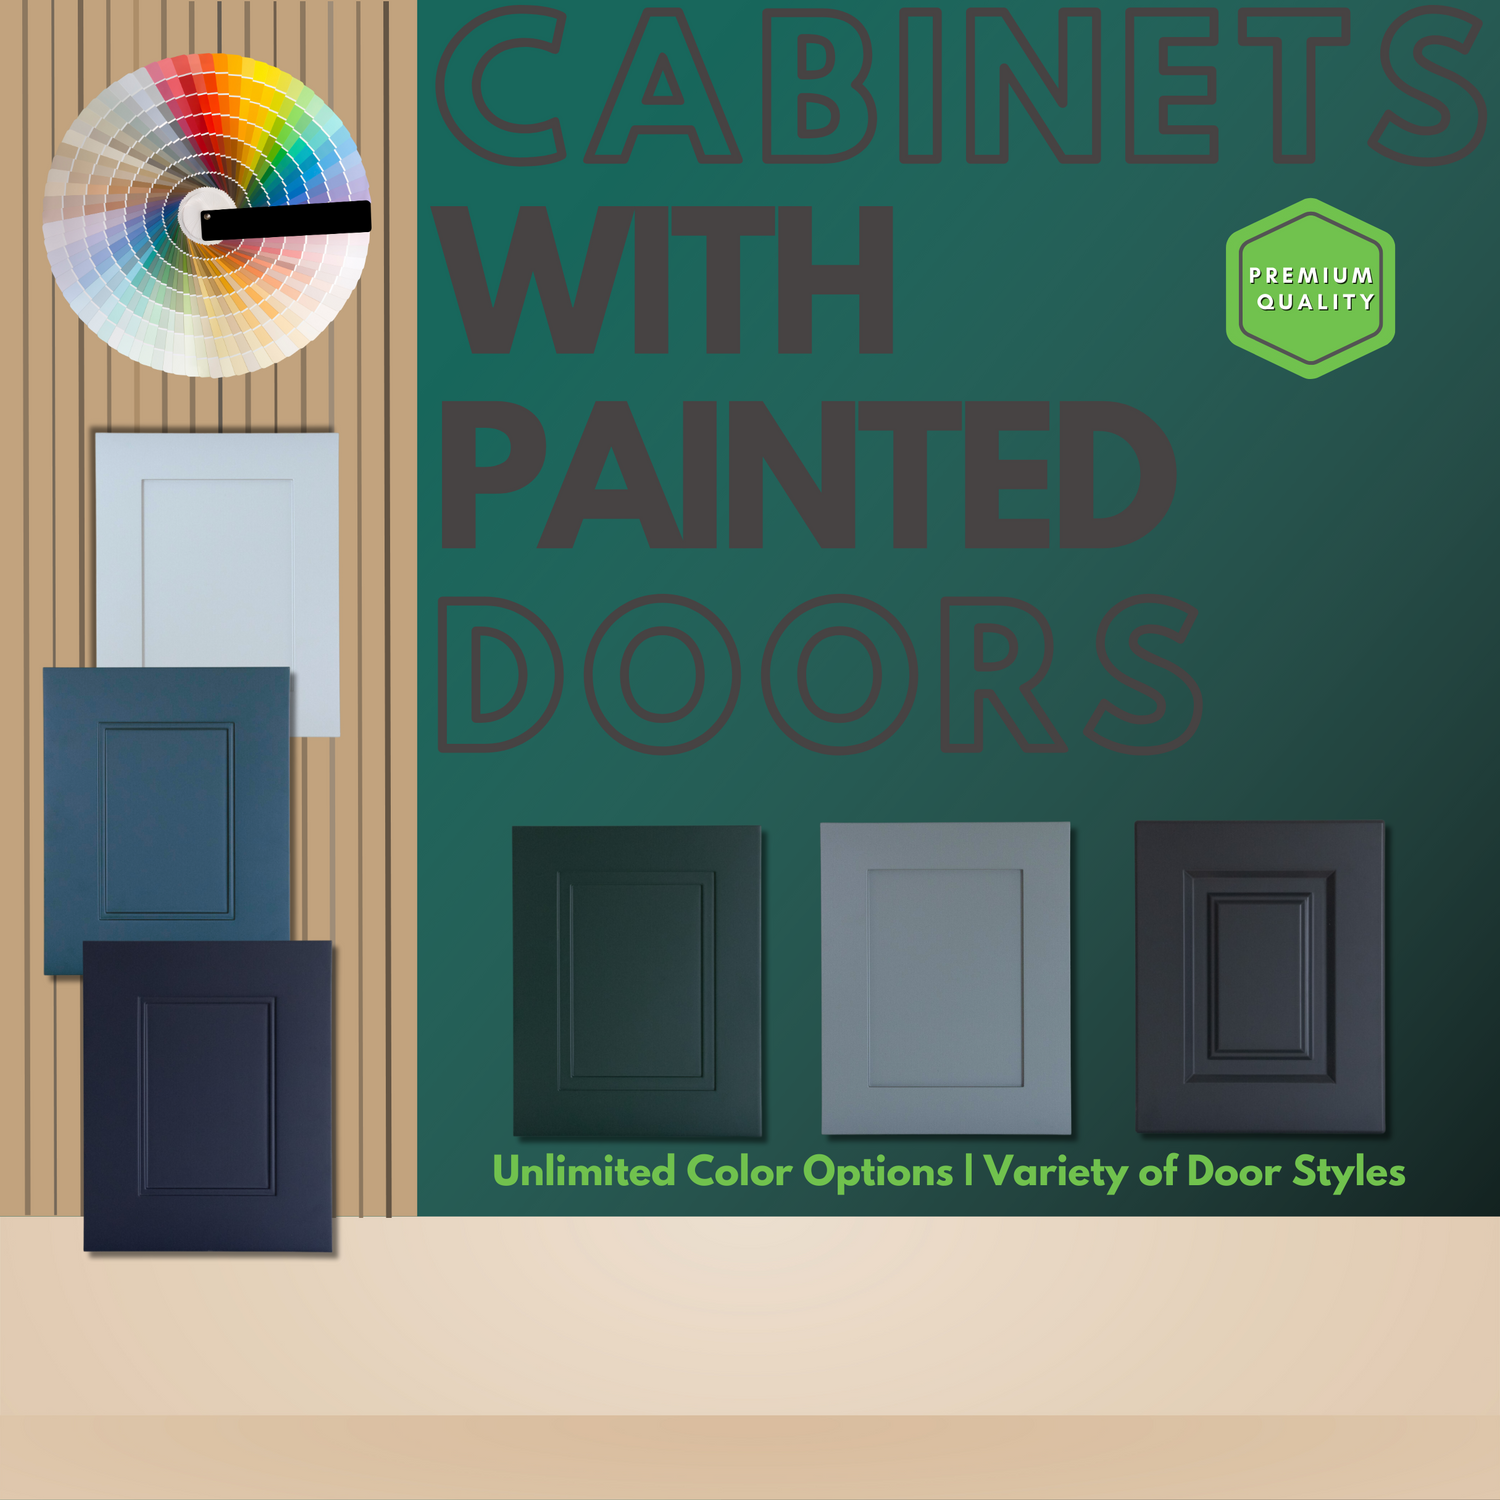 Cabinets with MDF Painted Doors - $$$